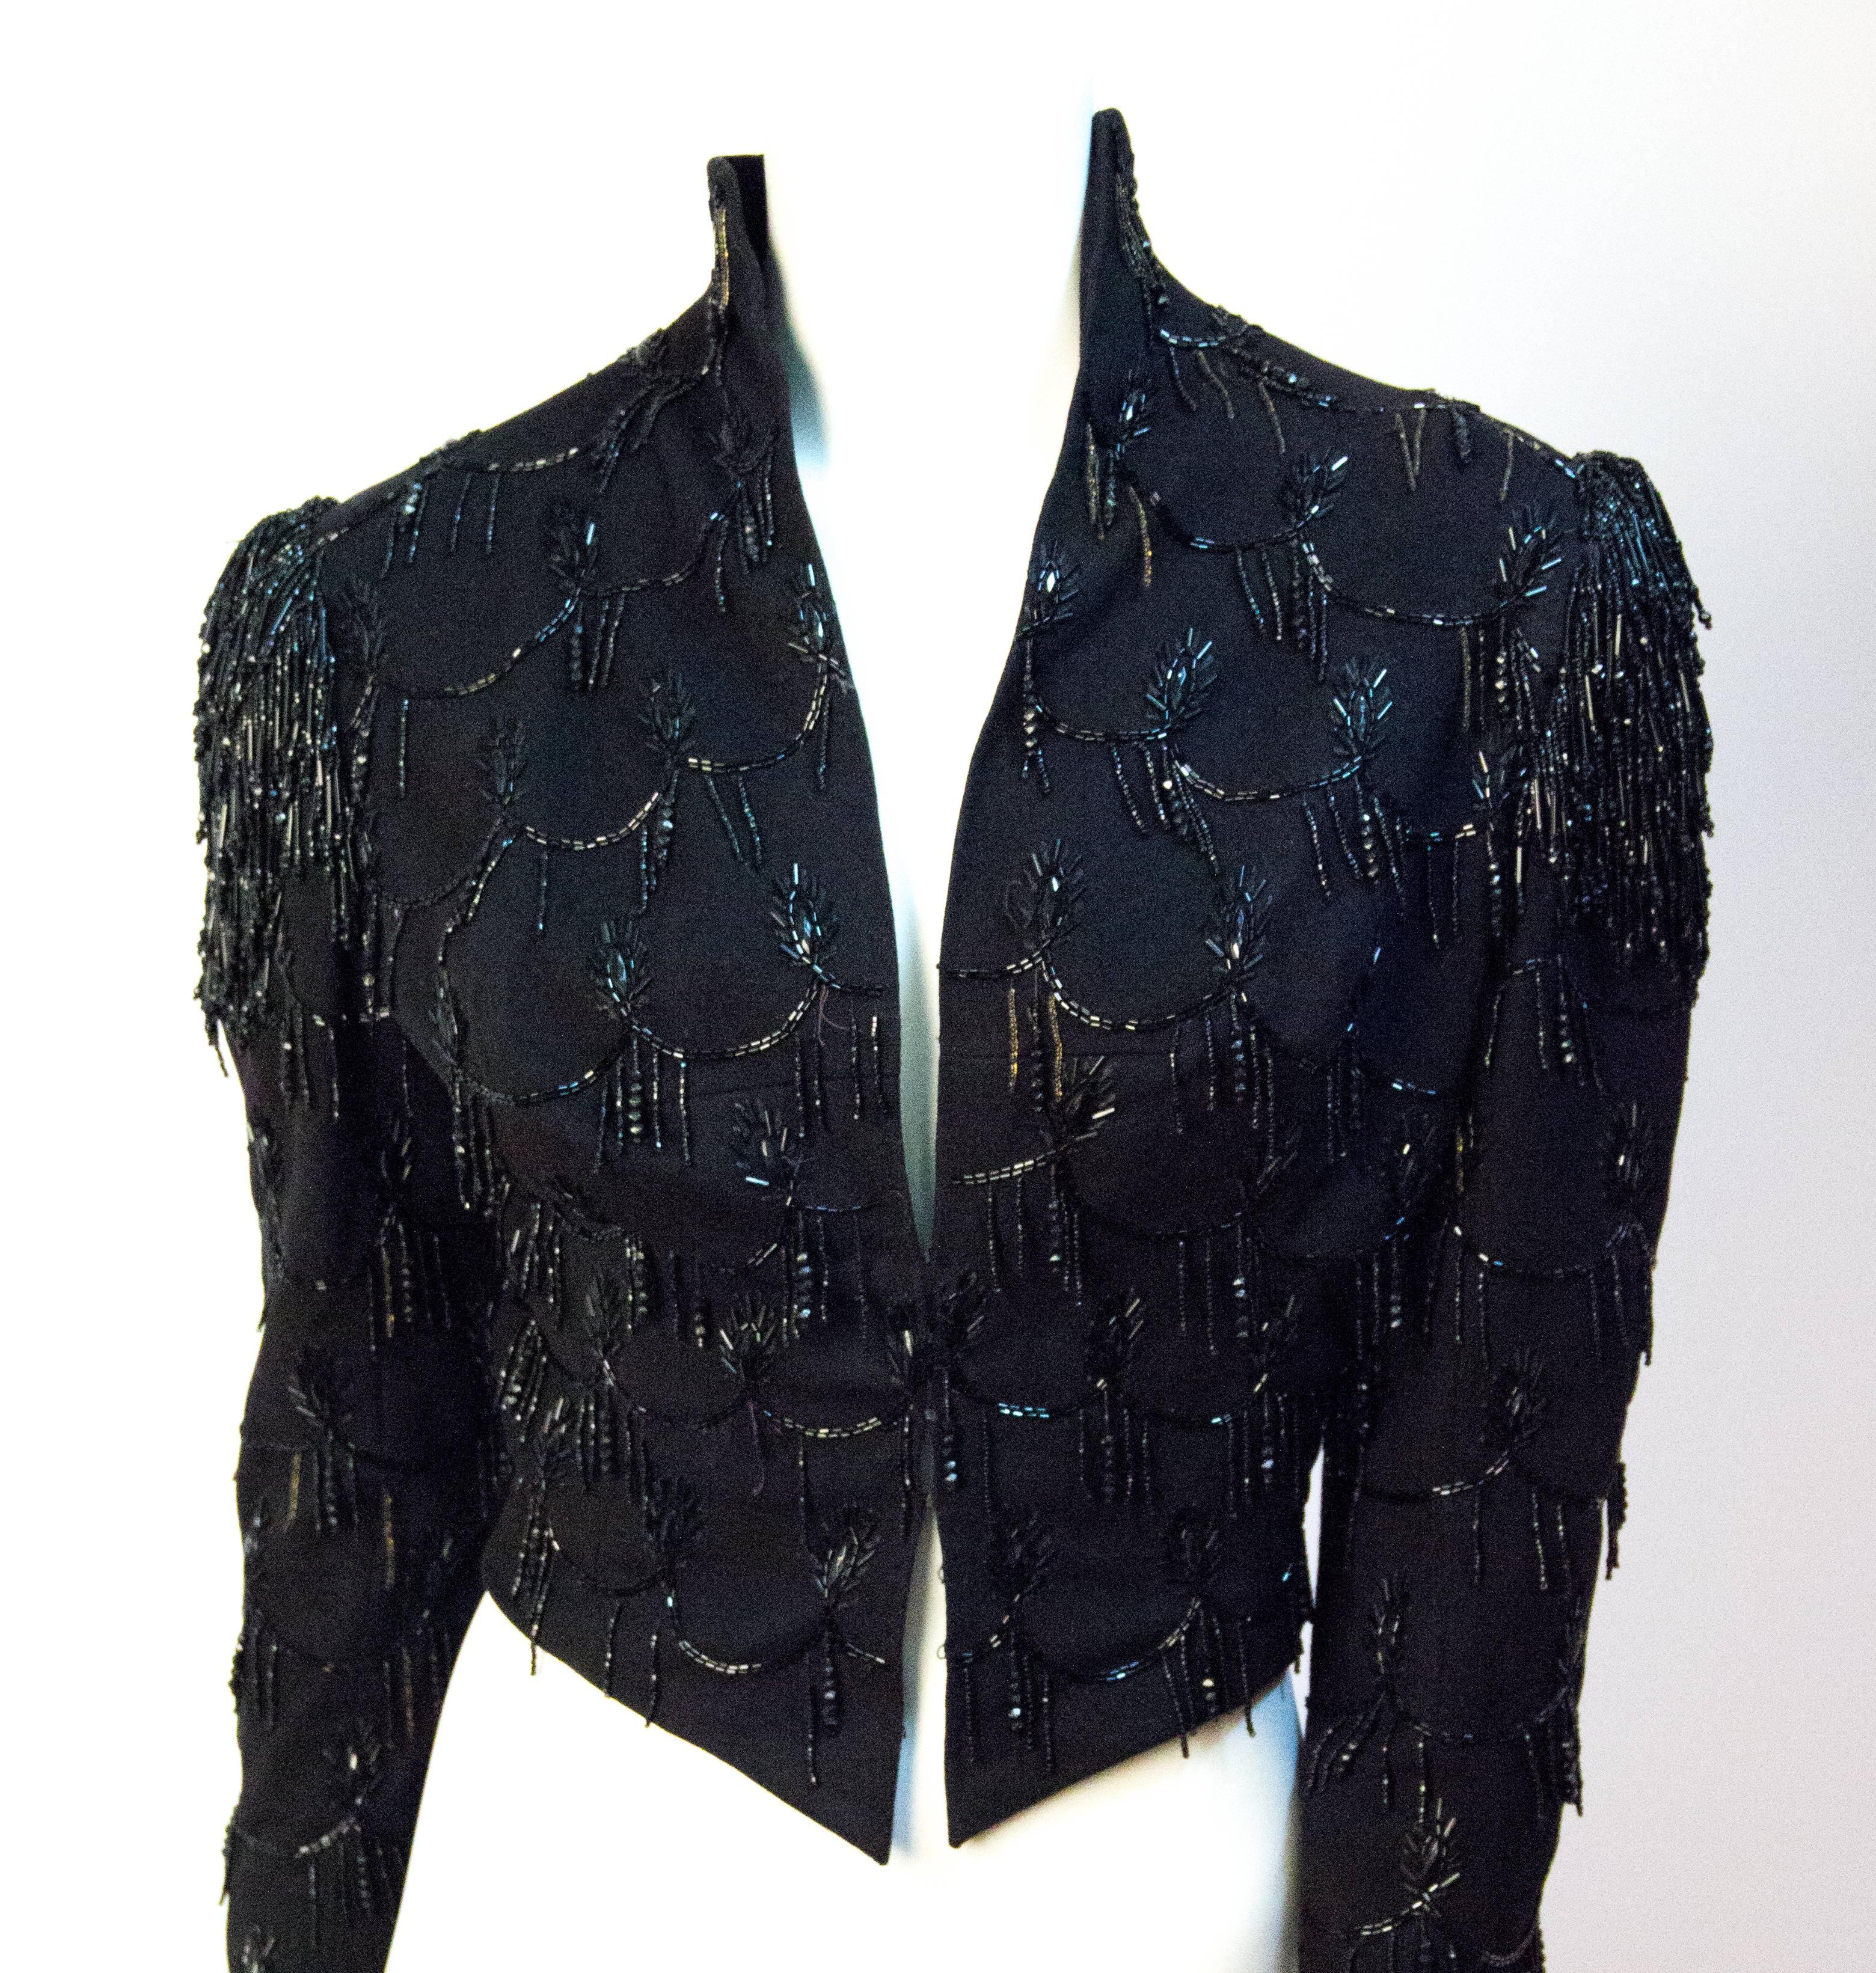 Victorian black wool jacket with jet bead embellishment. Beaded fringe shoulder detail. Lined in satin. Hook and eye closure. 